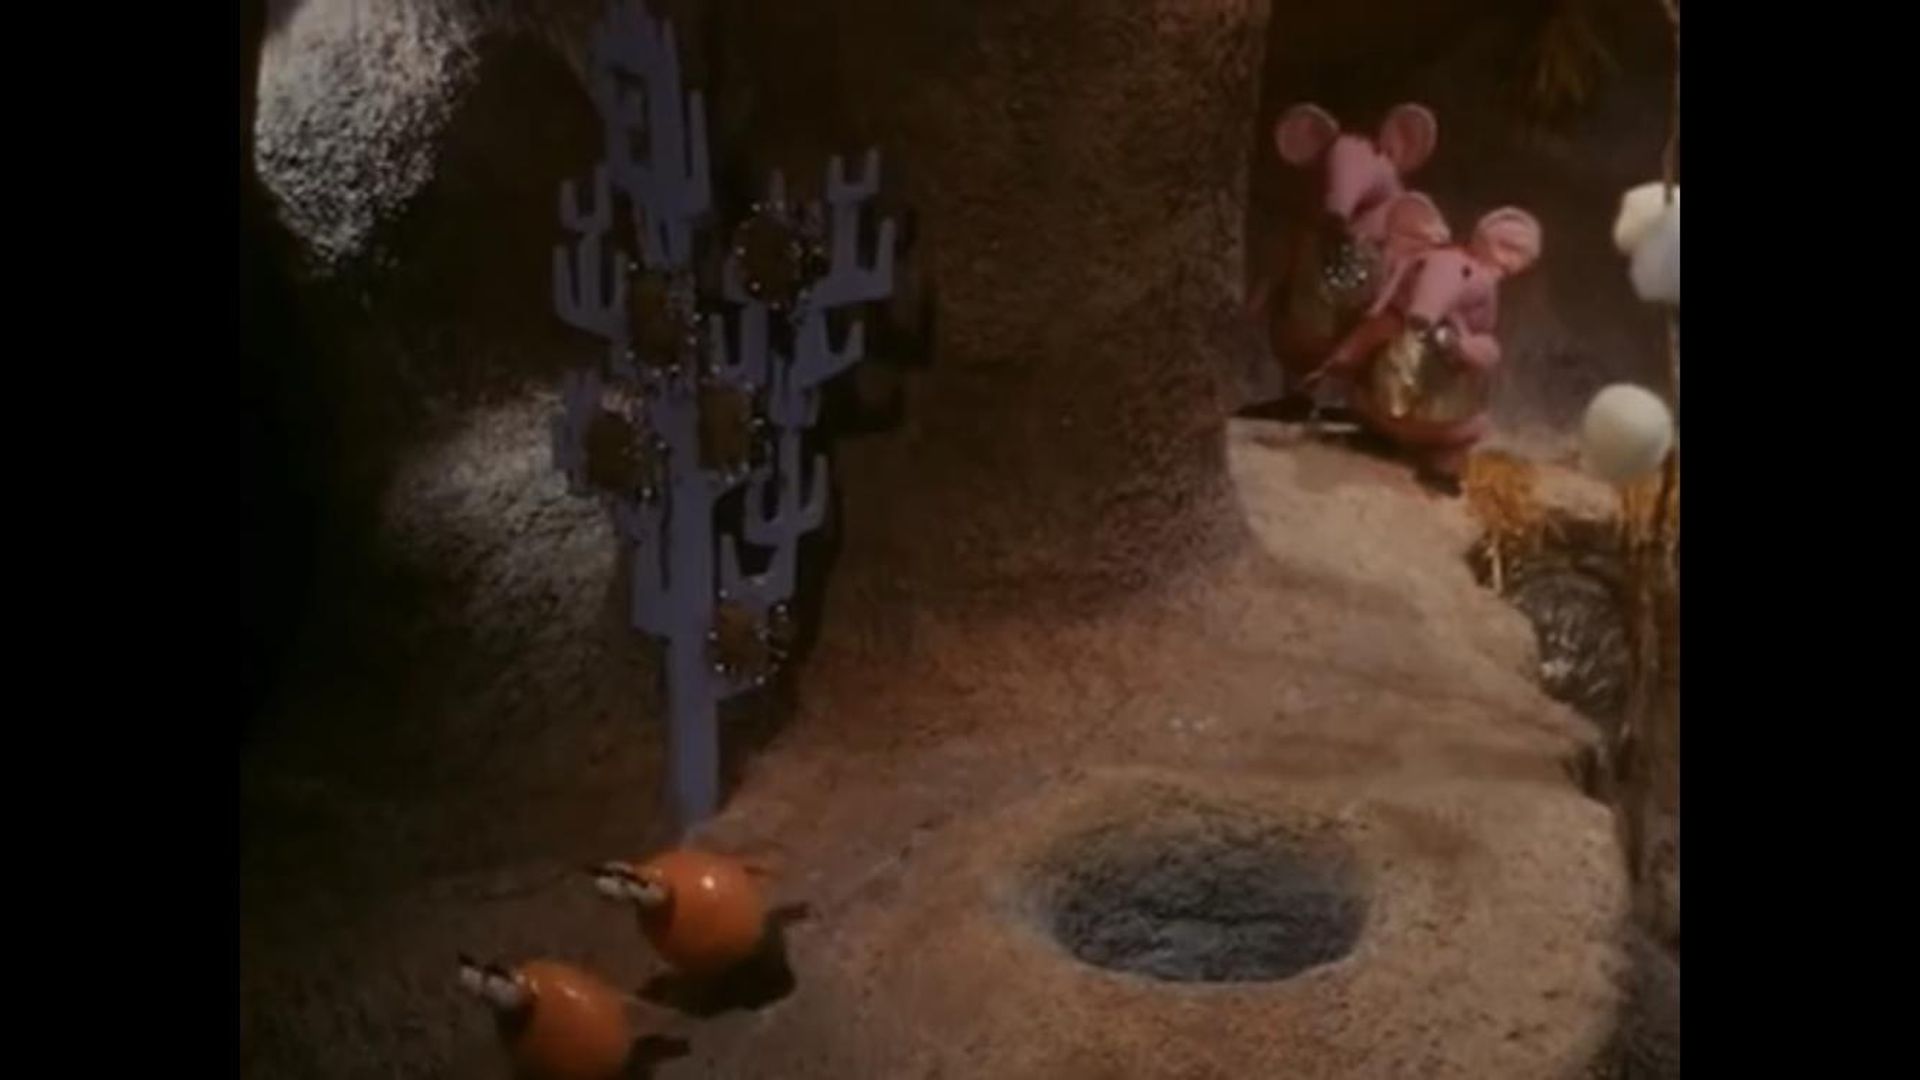 The Clangers background